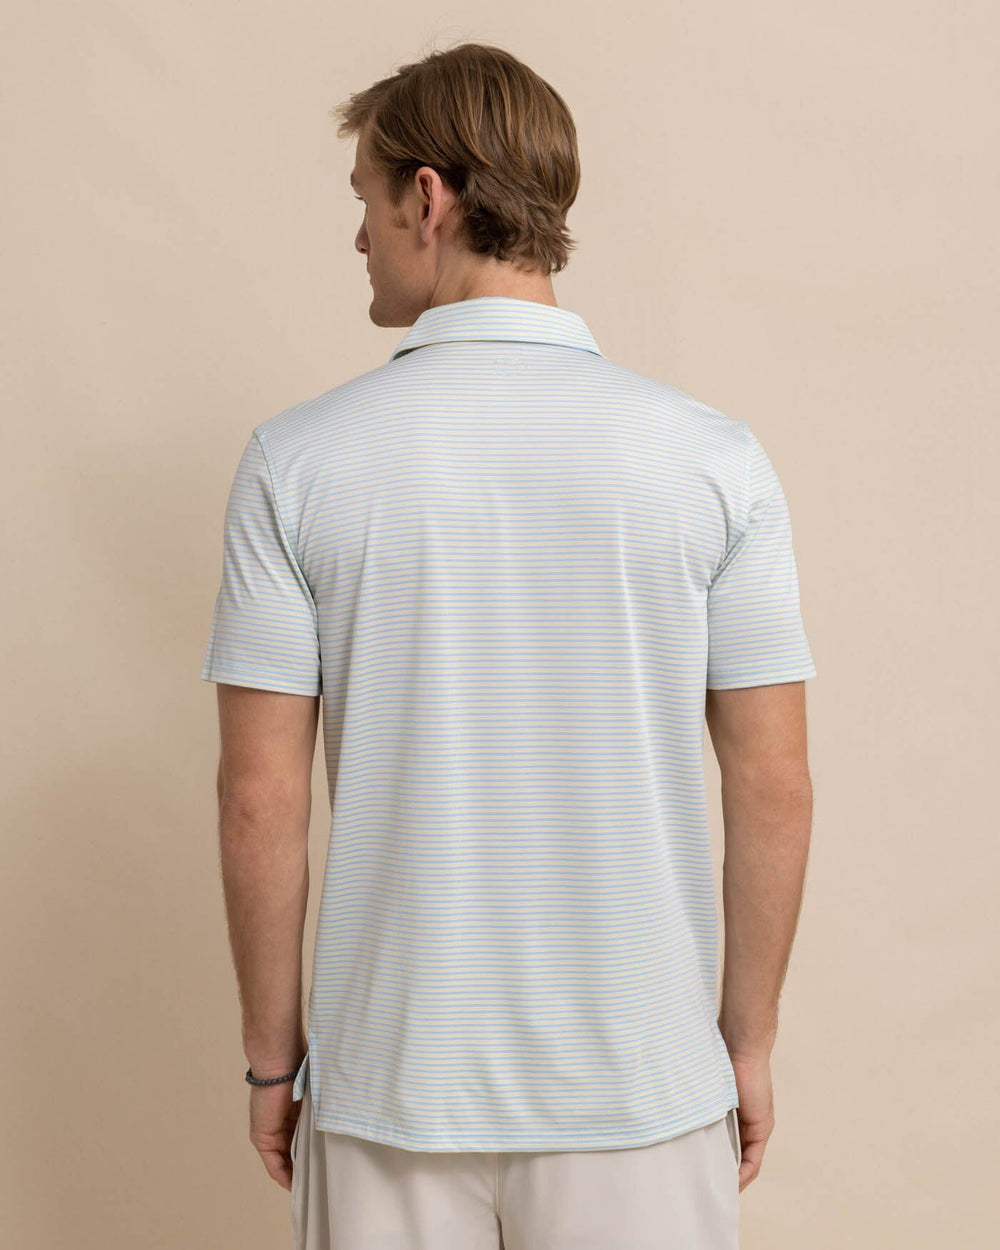 The back view of the Southern Tide Driver Verdae Stripe Polo by Southern Tide - Golden Haze Yellow